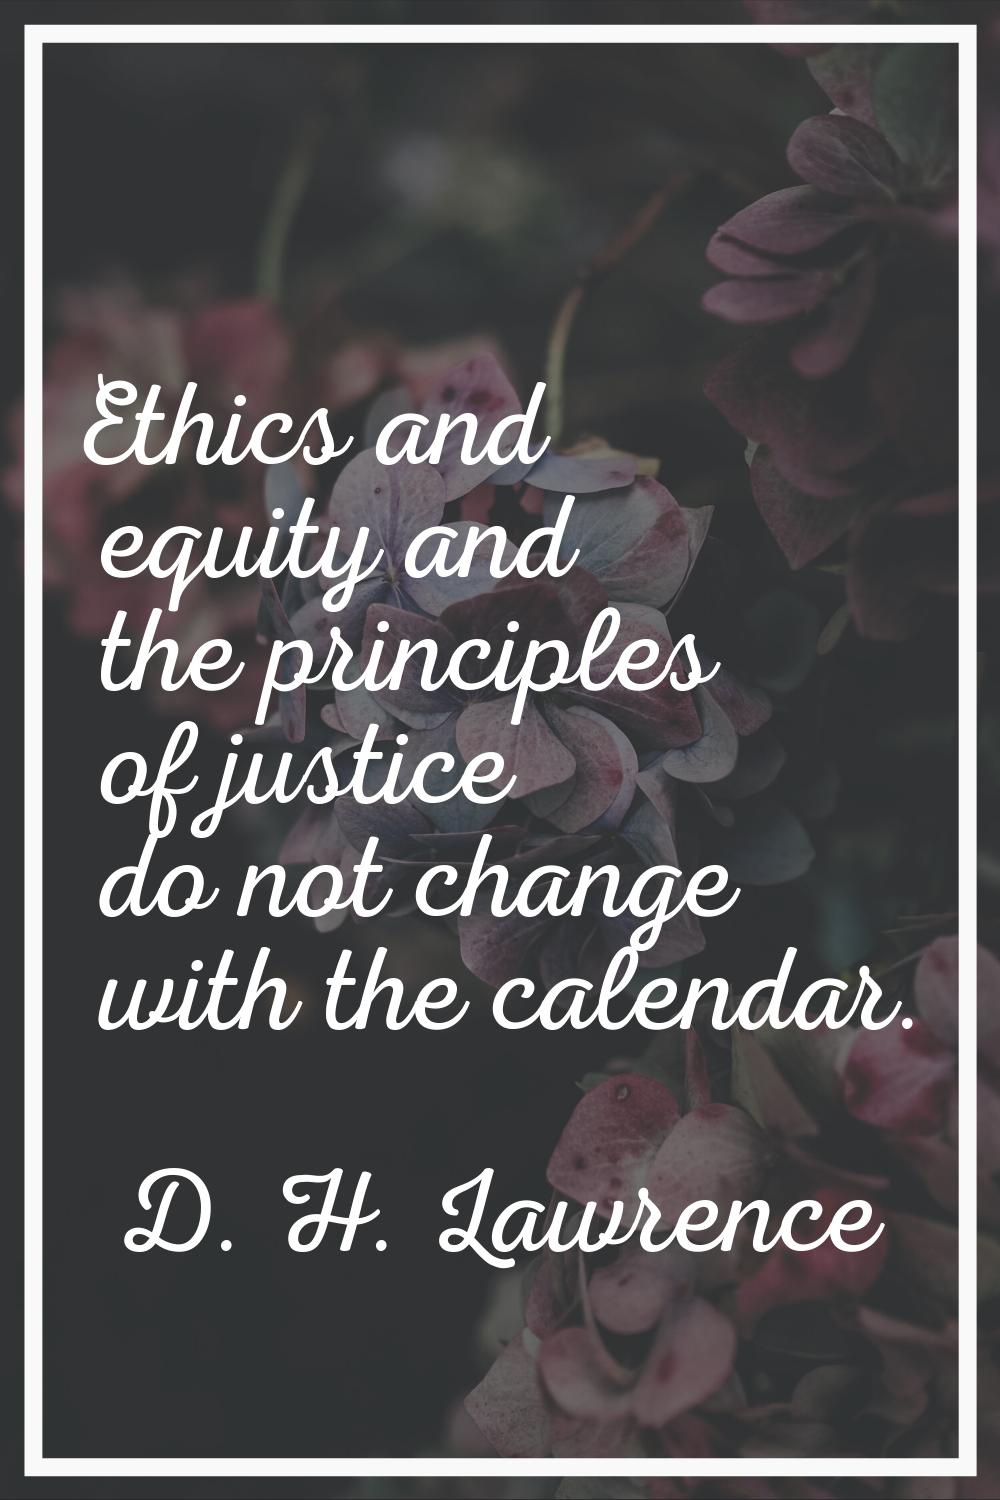 Ethics and equity and the principles of justice do not change with the calendar.